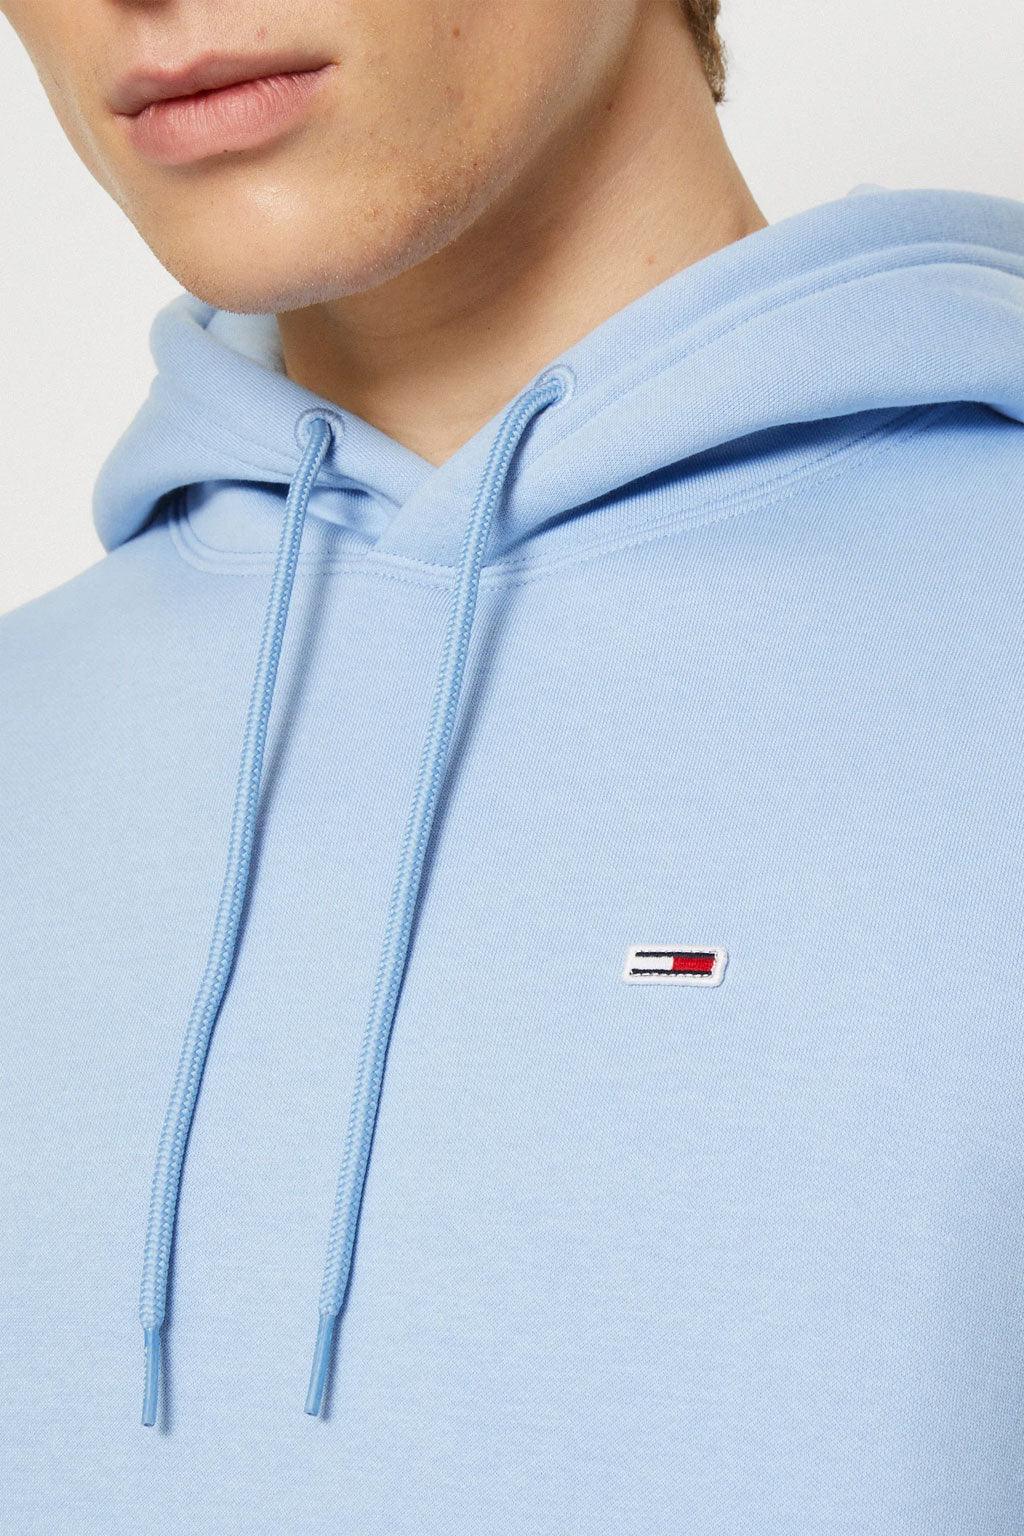 Tommy Jeans hoodie - Big Boss | the menswear concept